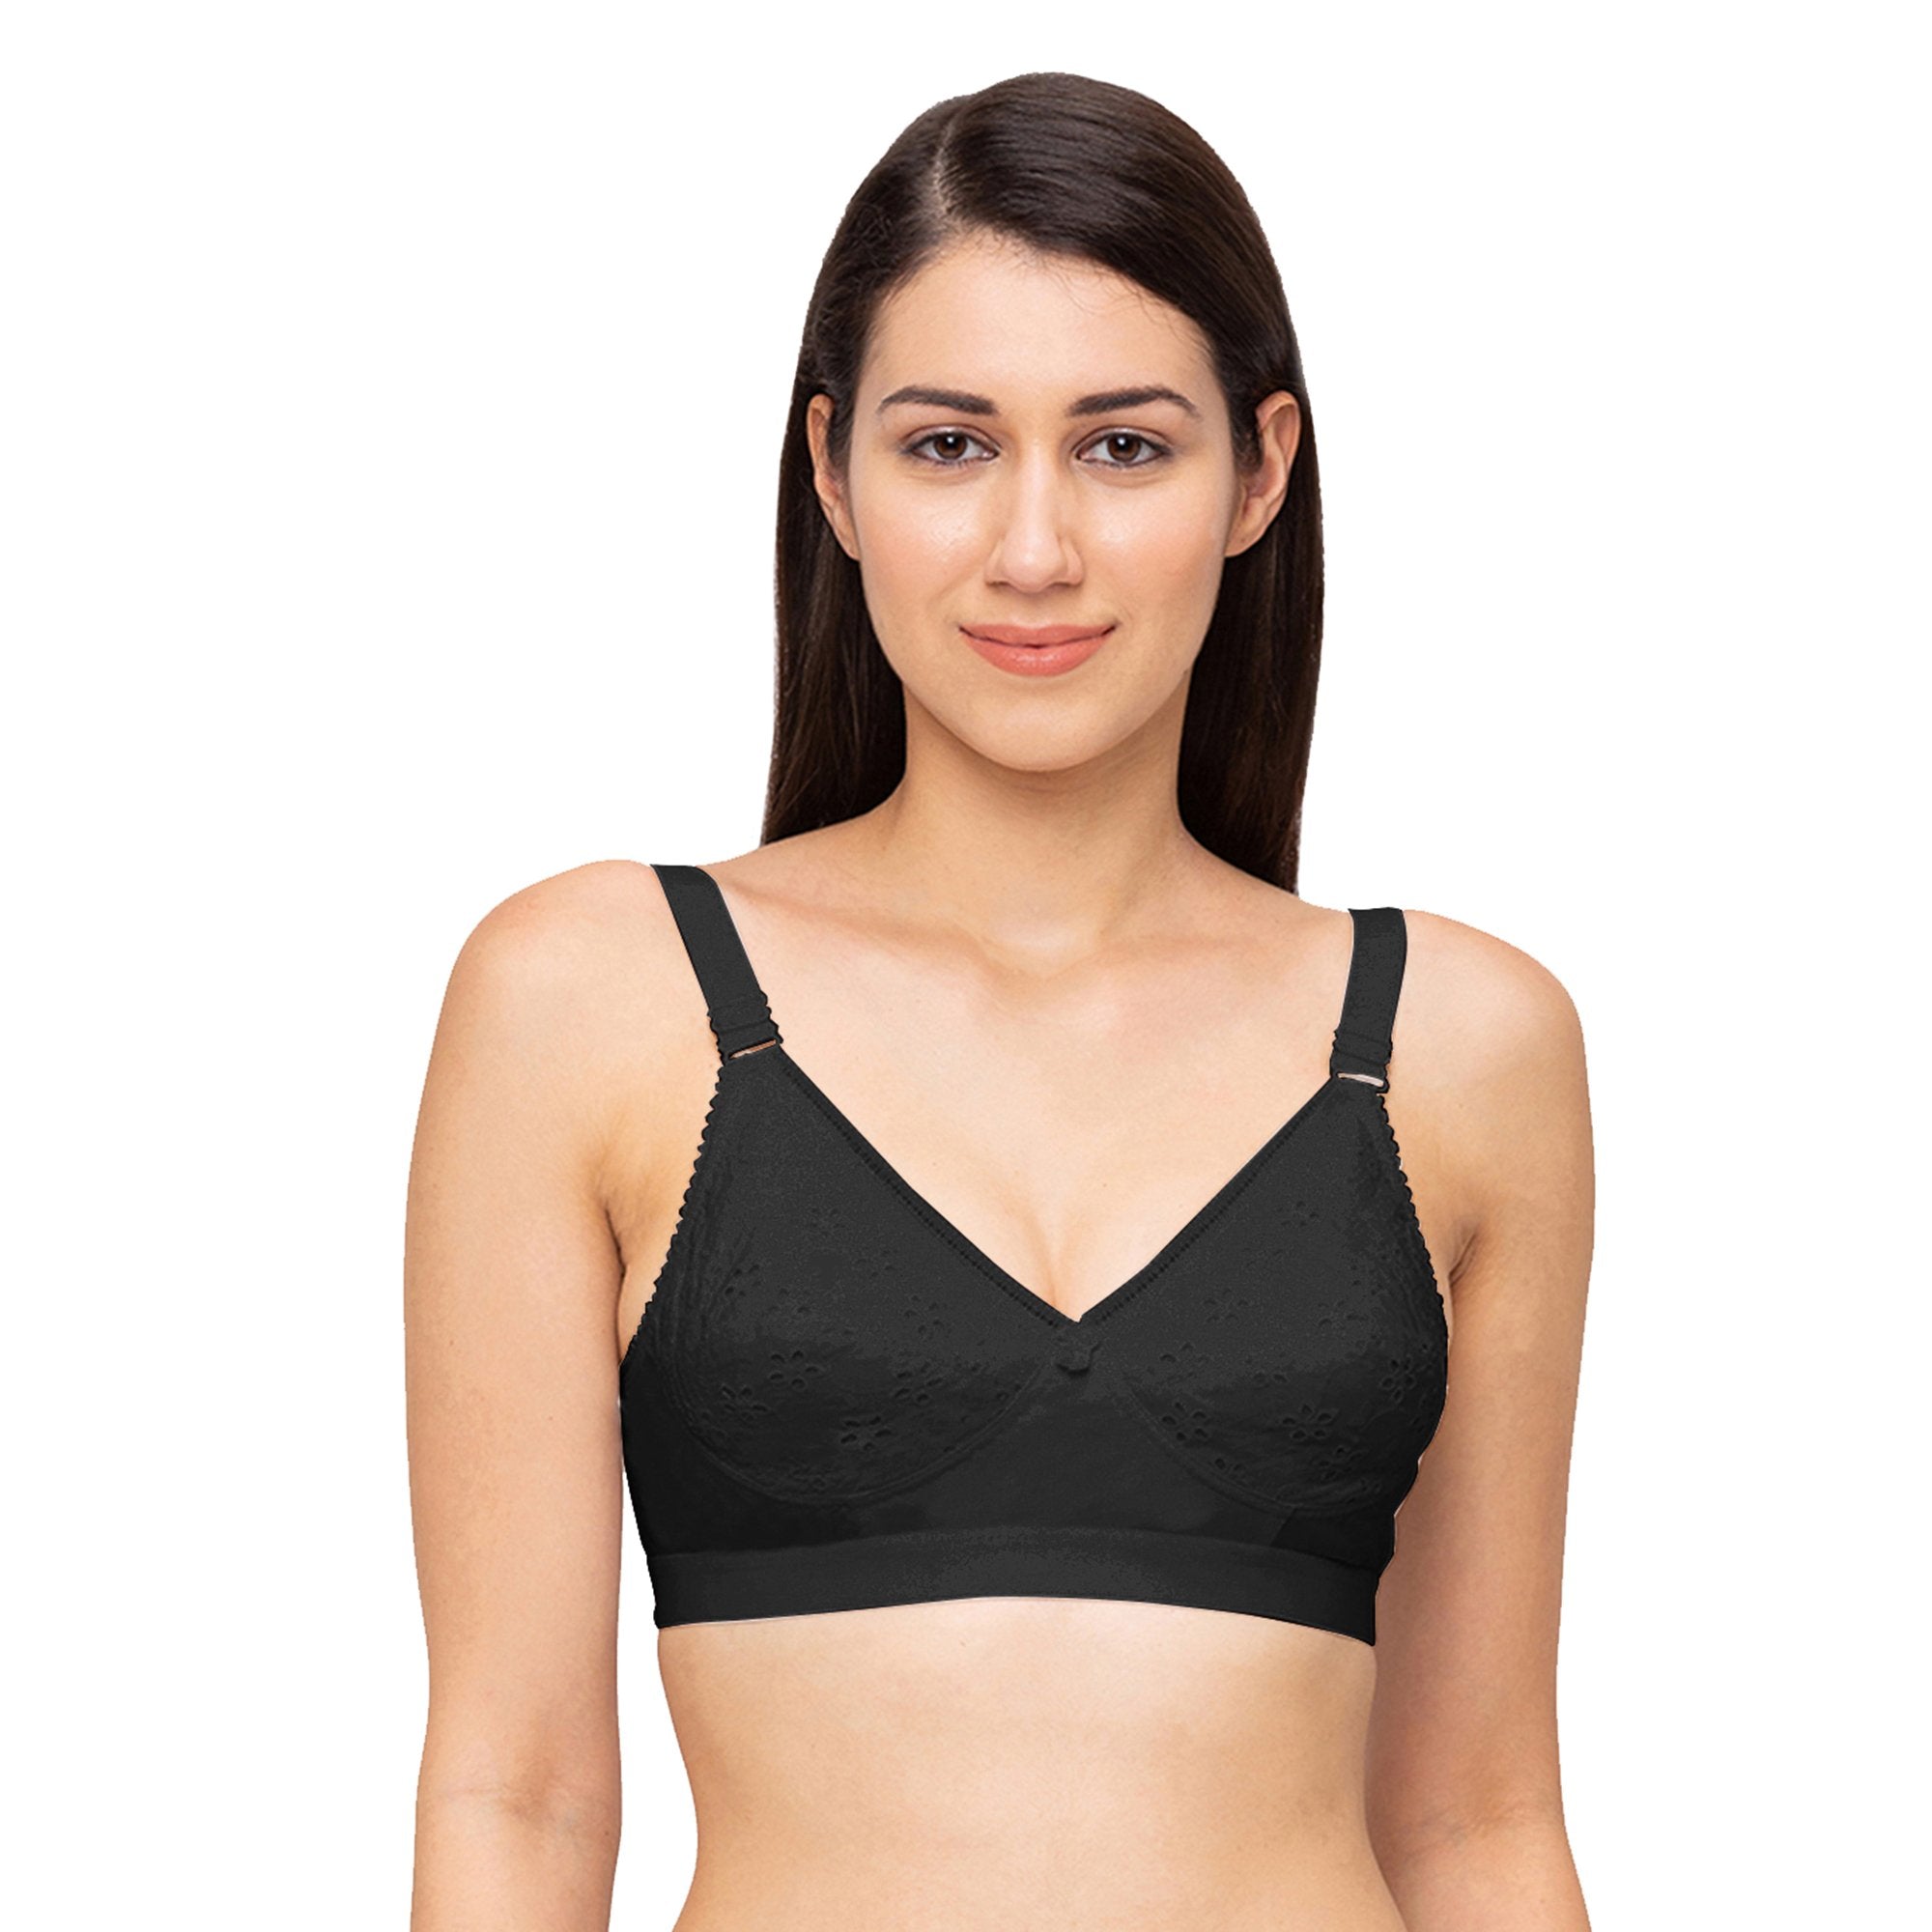 Non Padded White Lycra Spandex Mold B Cup Bra, Plain at Rs 208